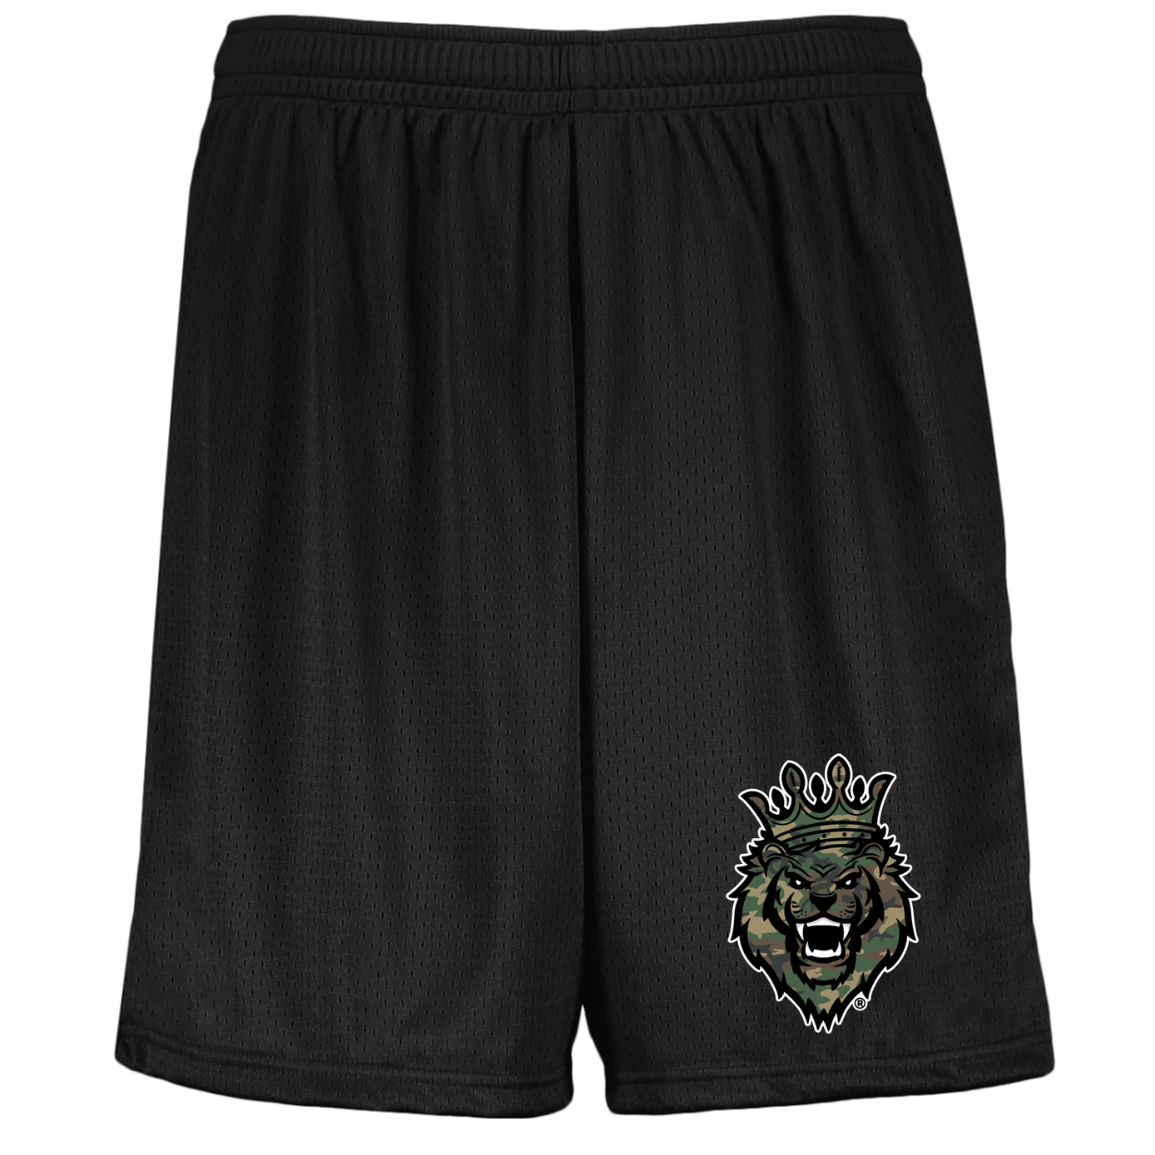 Respect The Roar (Green) - 1851 Youth Moisture-Wicking Mesh Shorts